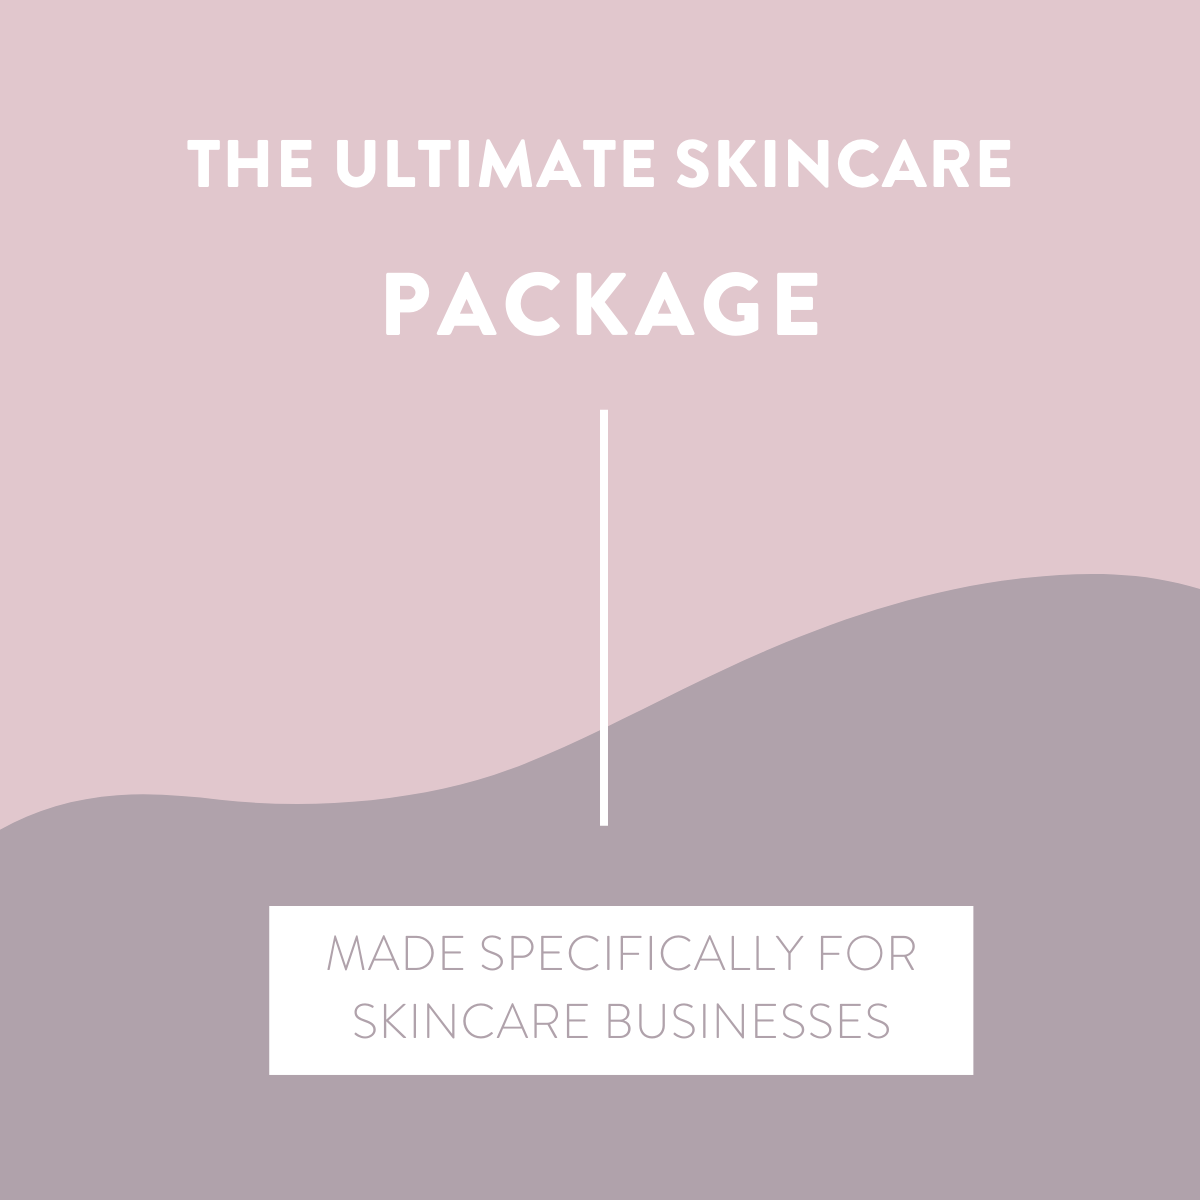 The Ultimate Skincare Package